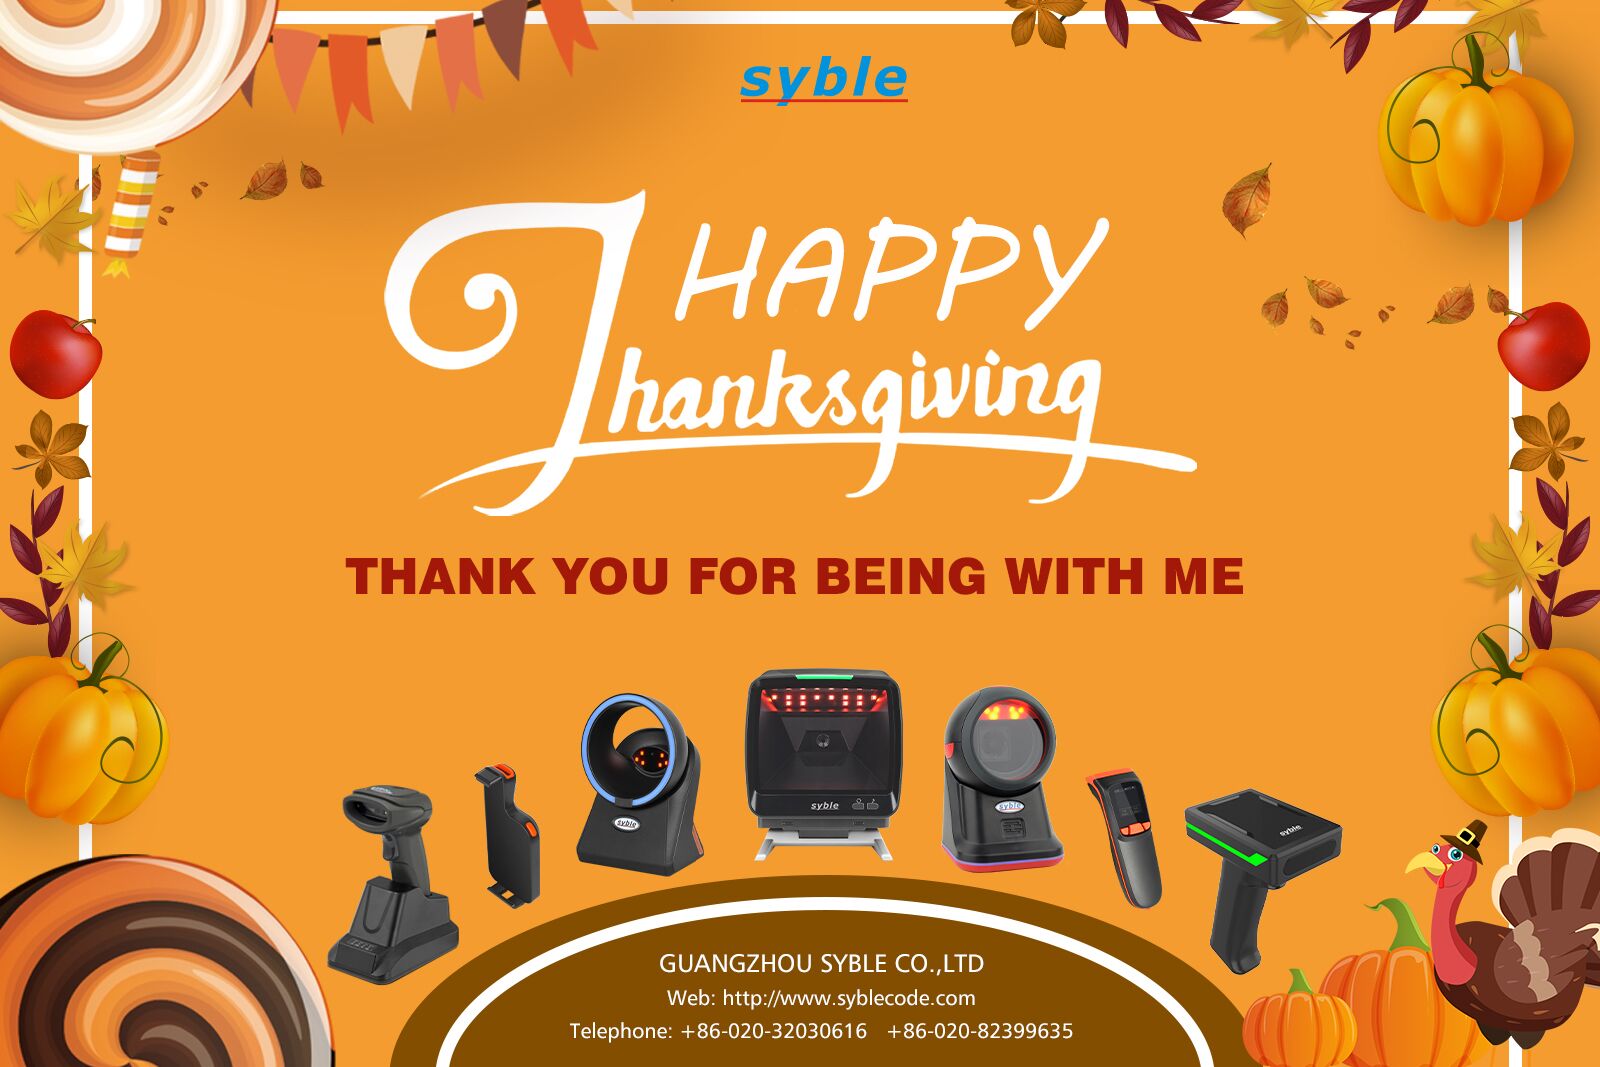 Sincerest appreciation to our customers in this thanksgiving day